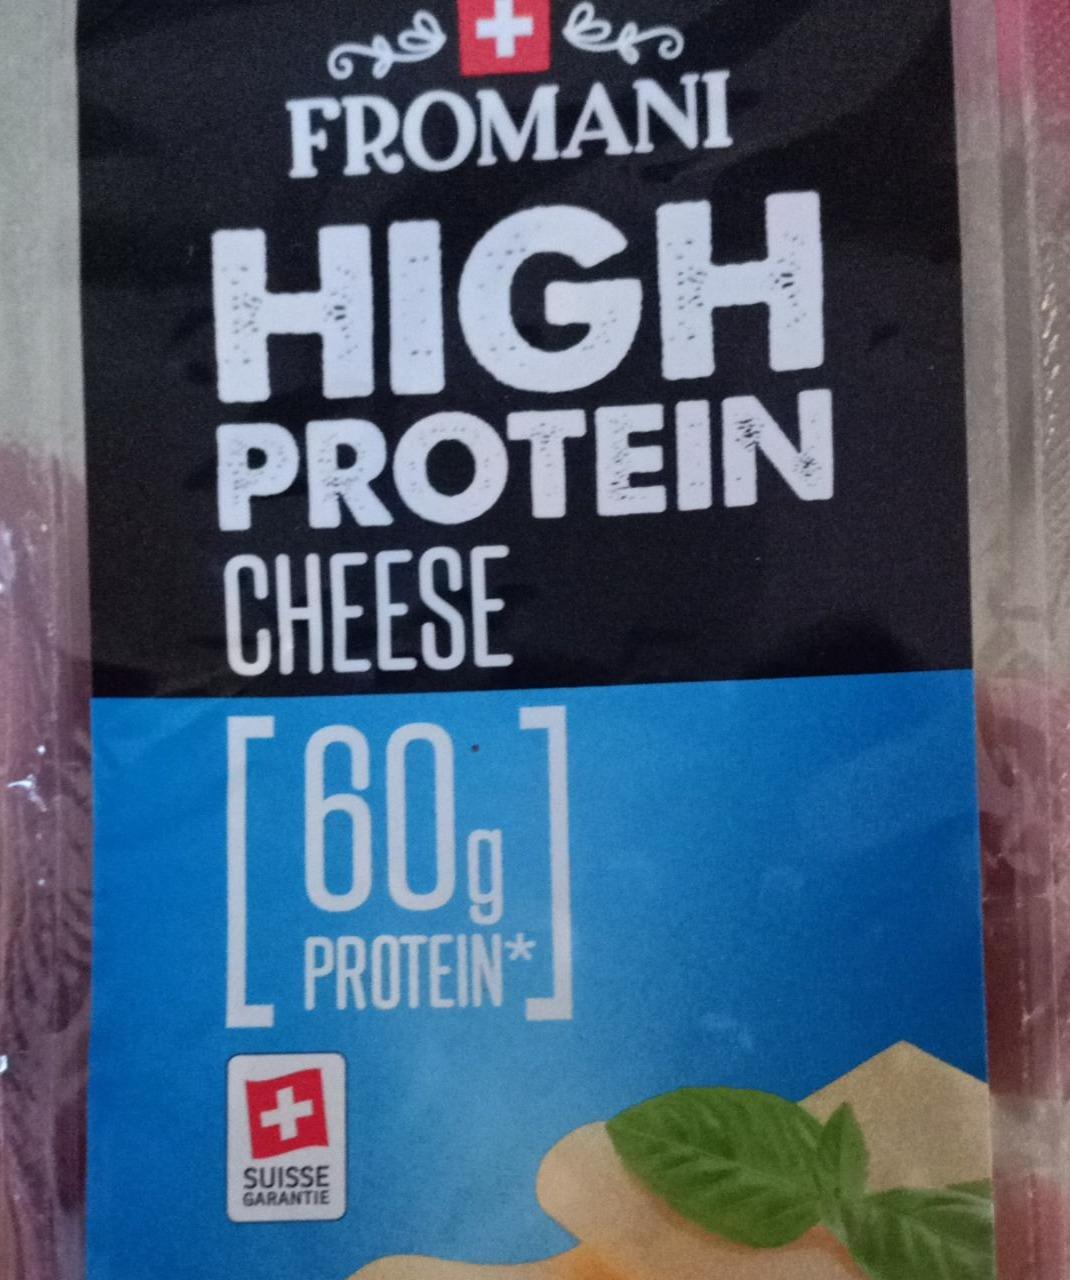 Fotografie - High Protein cheese Formani